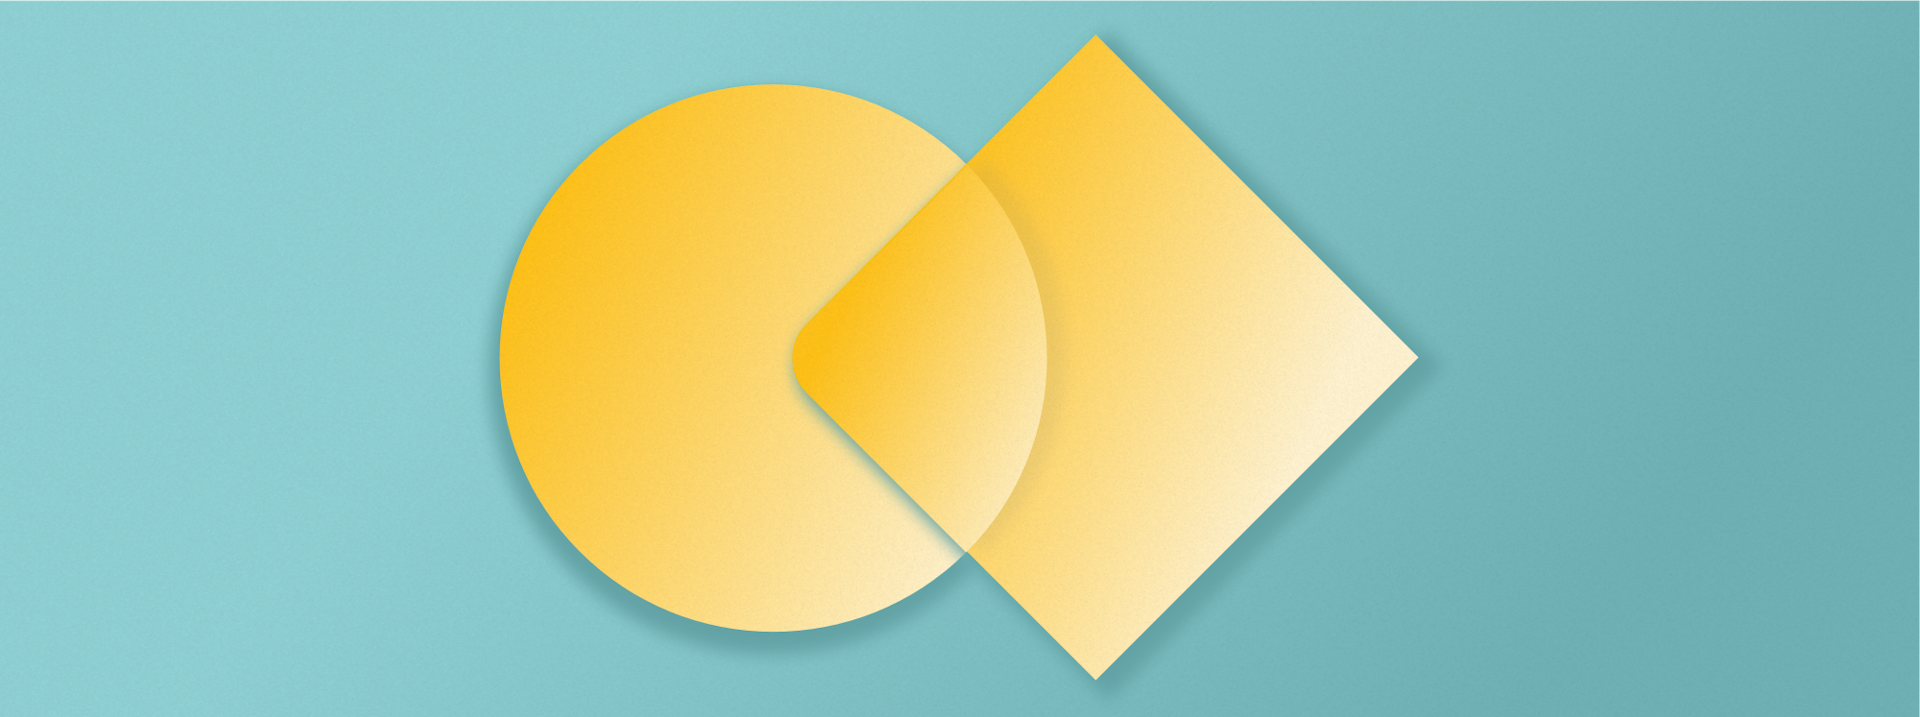 Abstract illustration of a yellow square overlapping with a yellow circle